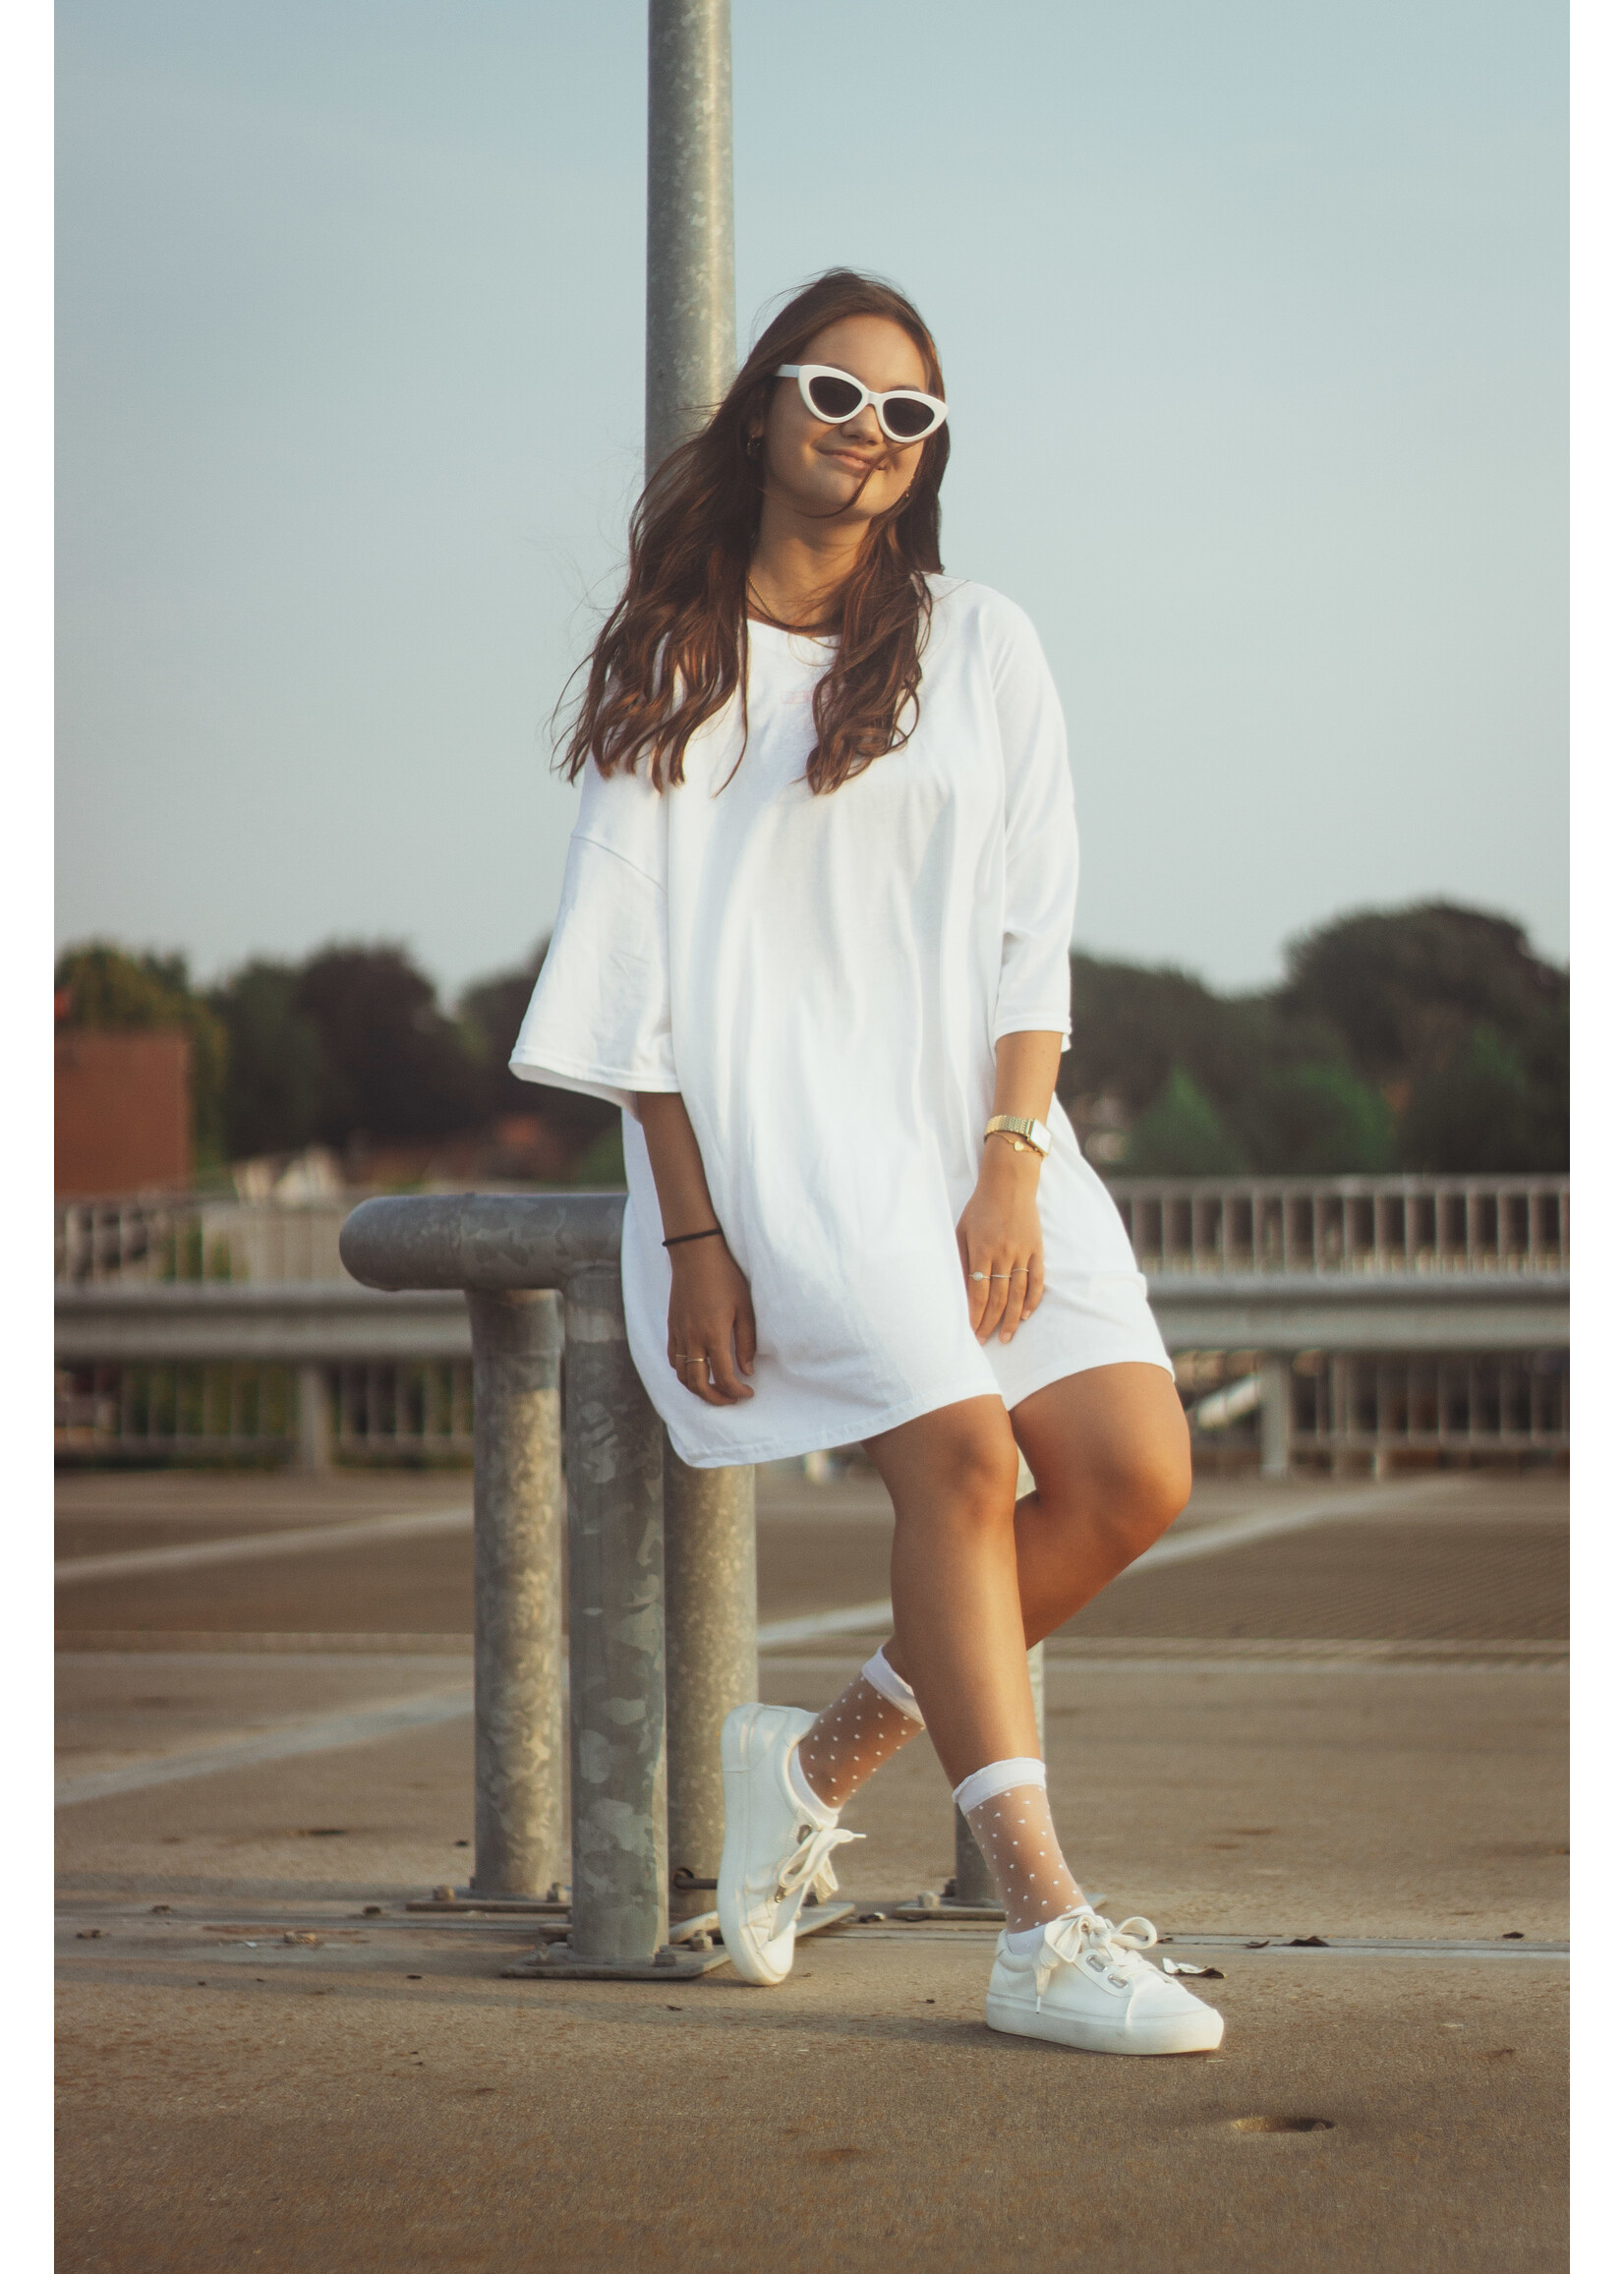 YOU ARE SPECIAL "Girls Bite Back" White T-Shirt Dress